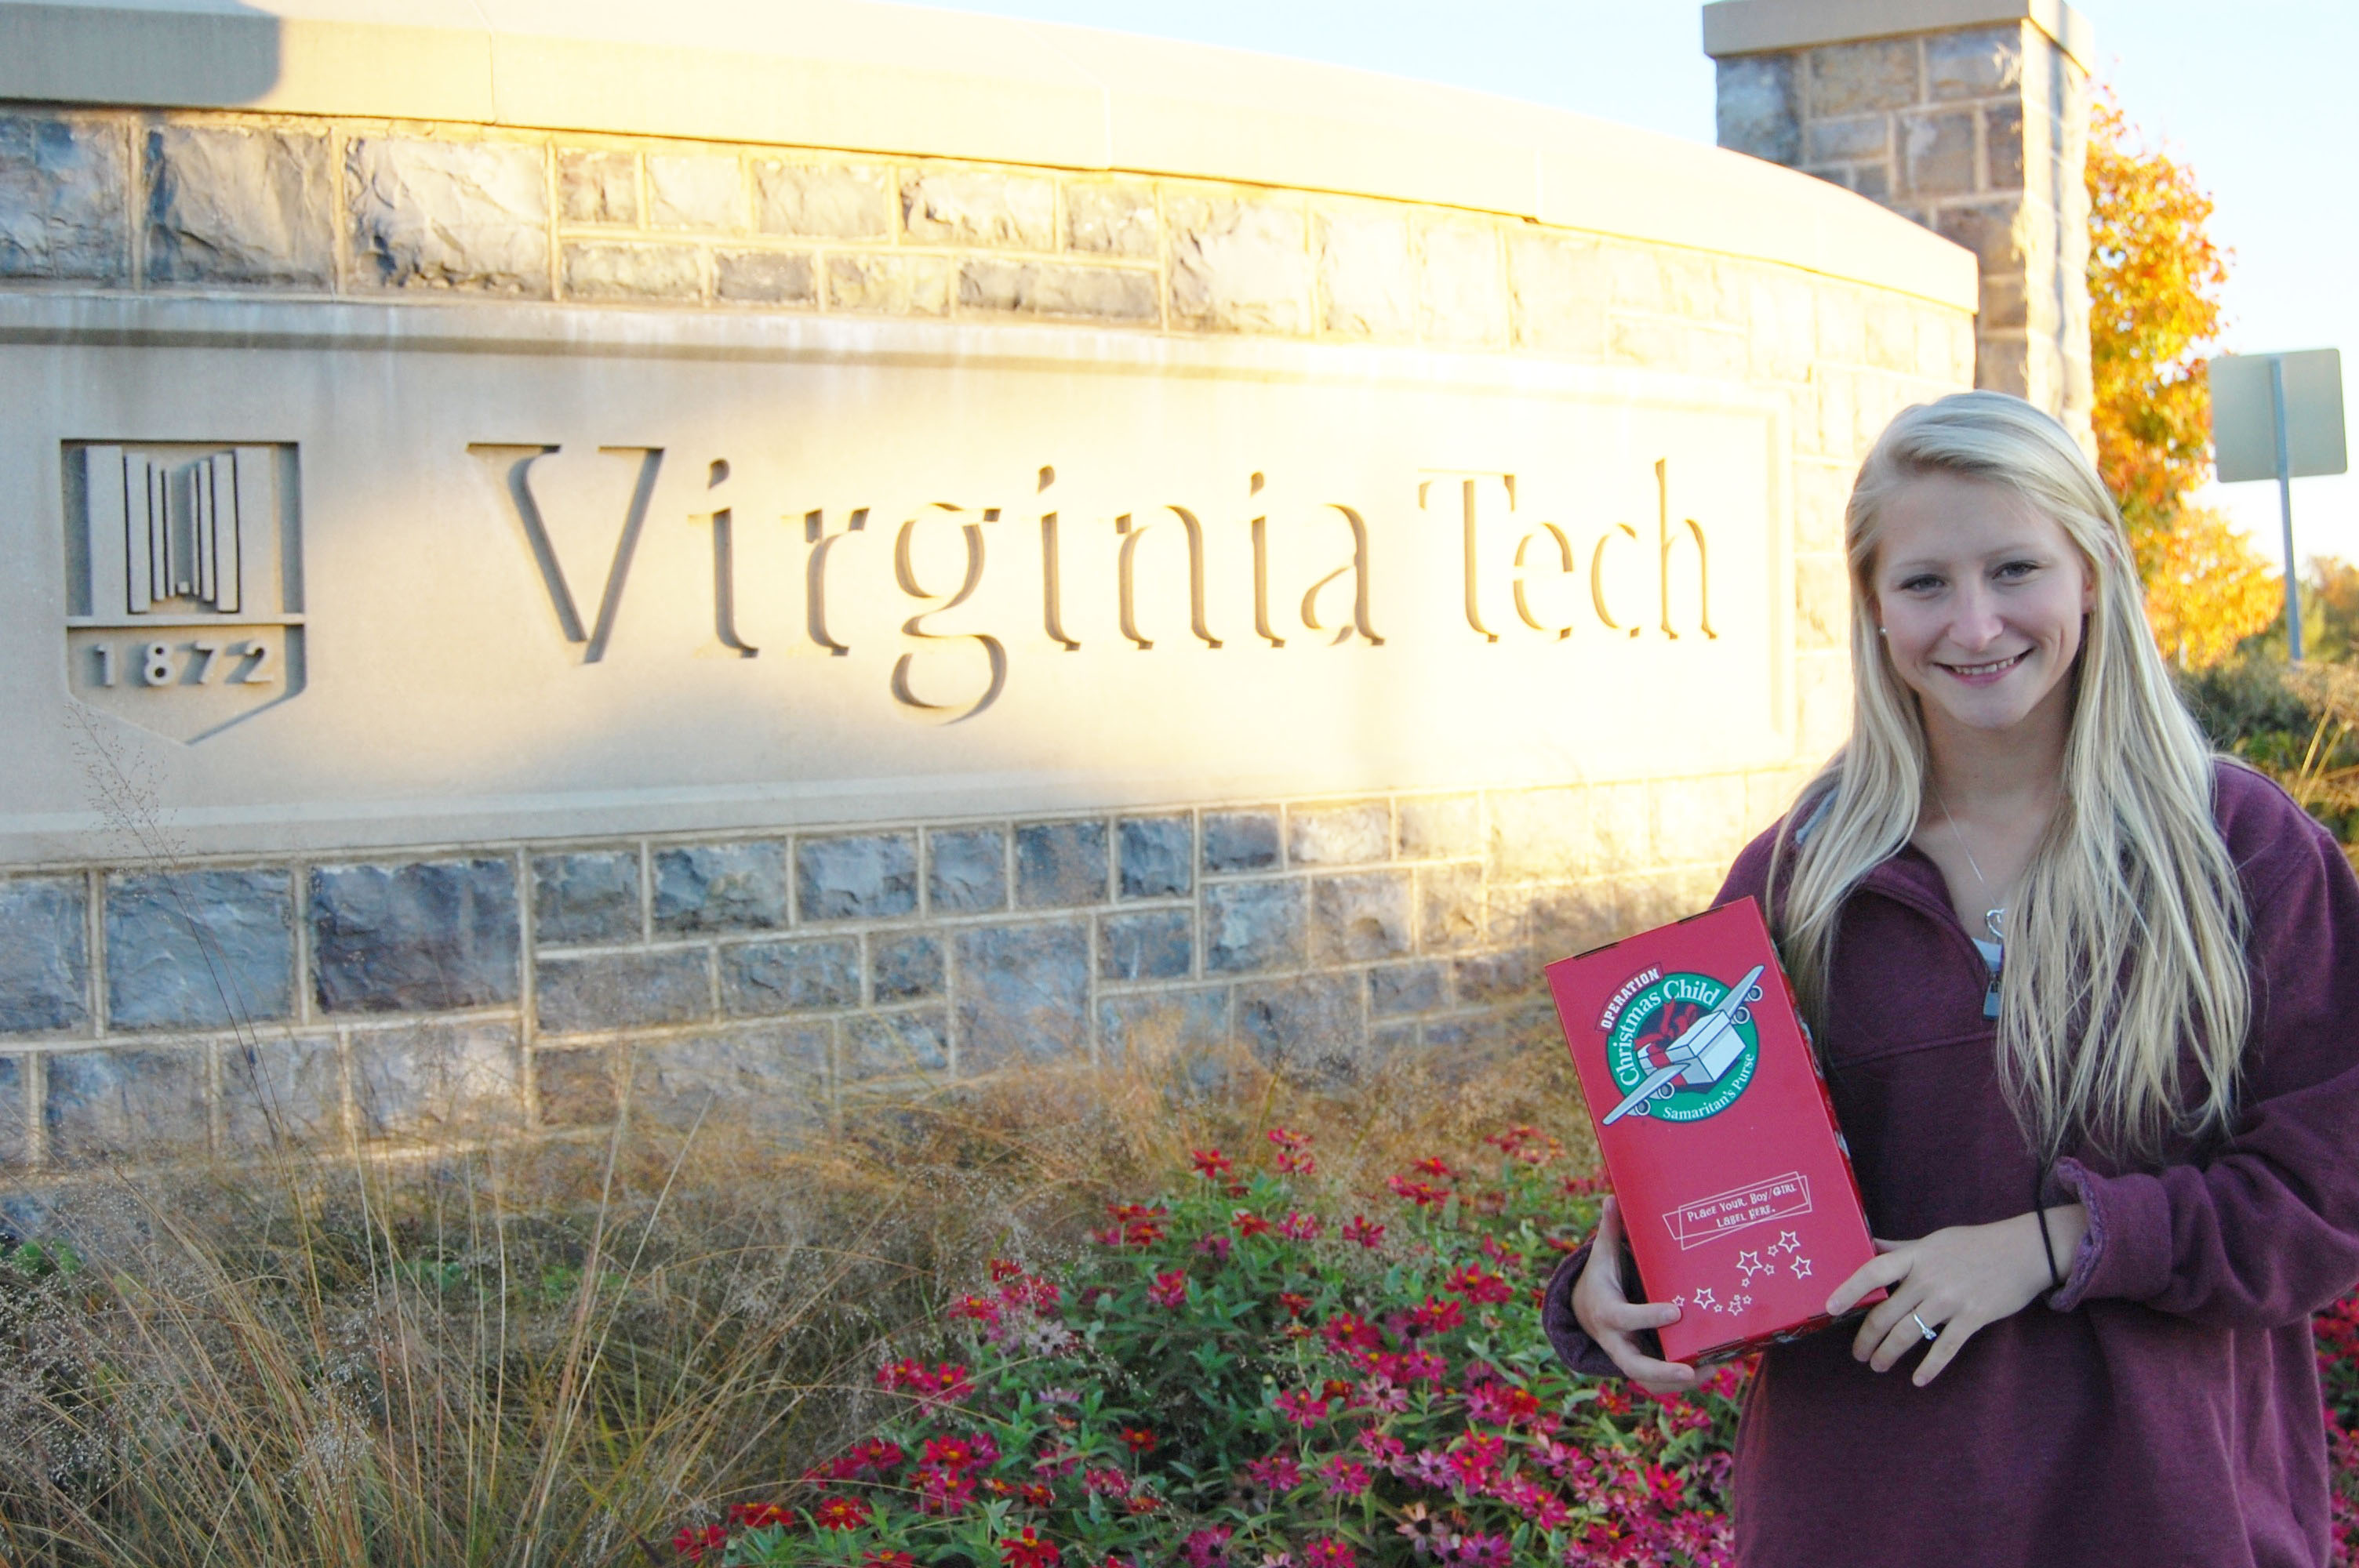 Student stands in front of Virginia Tech entrance sign